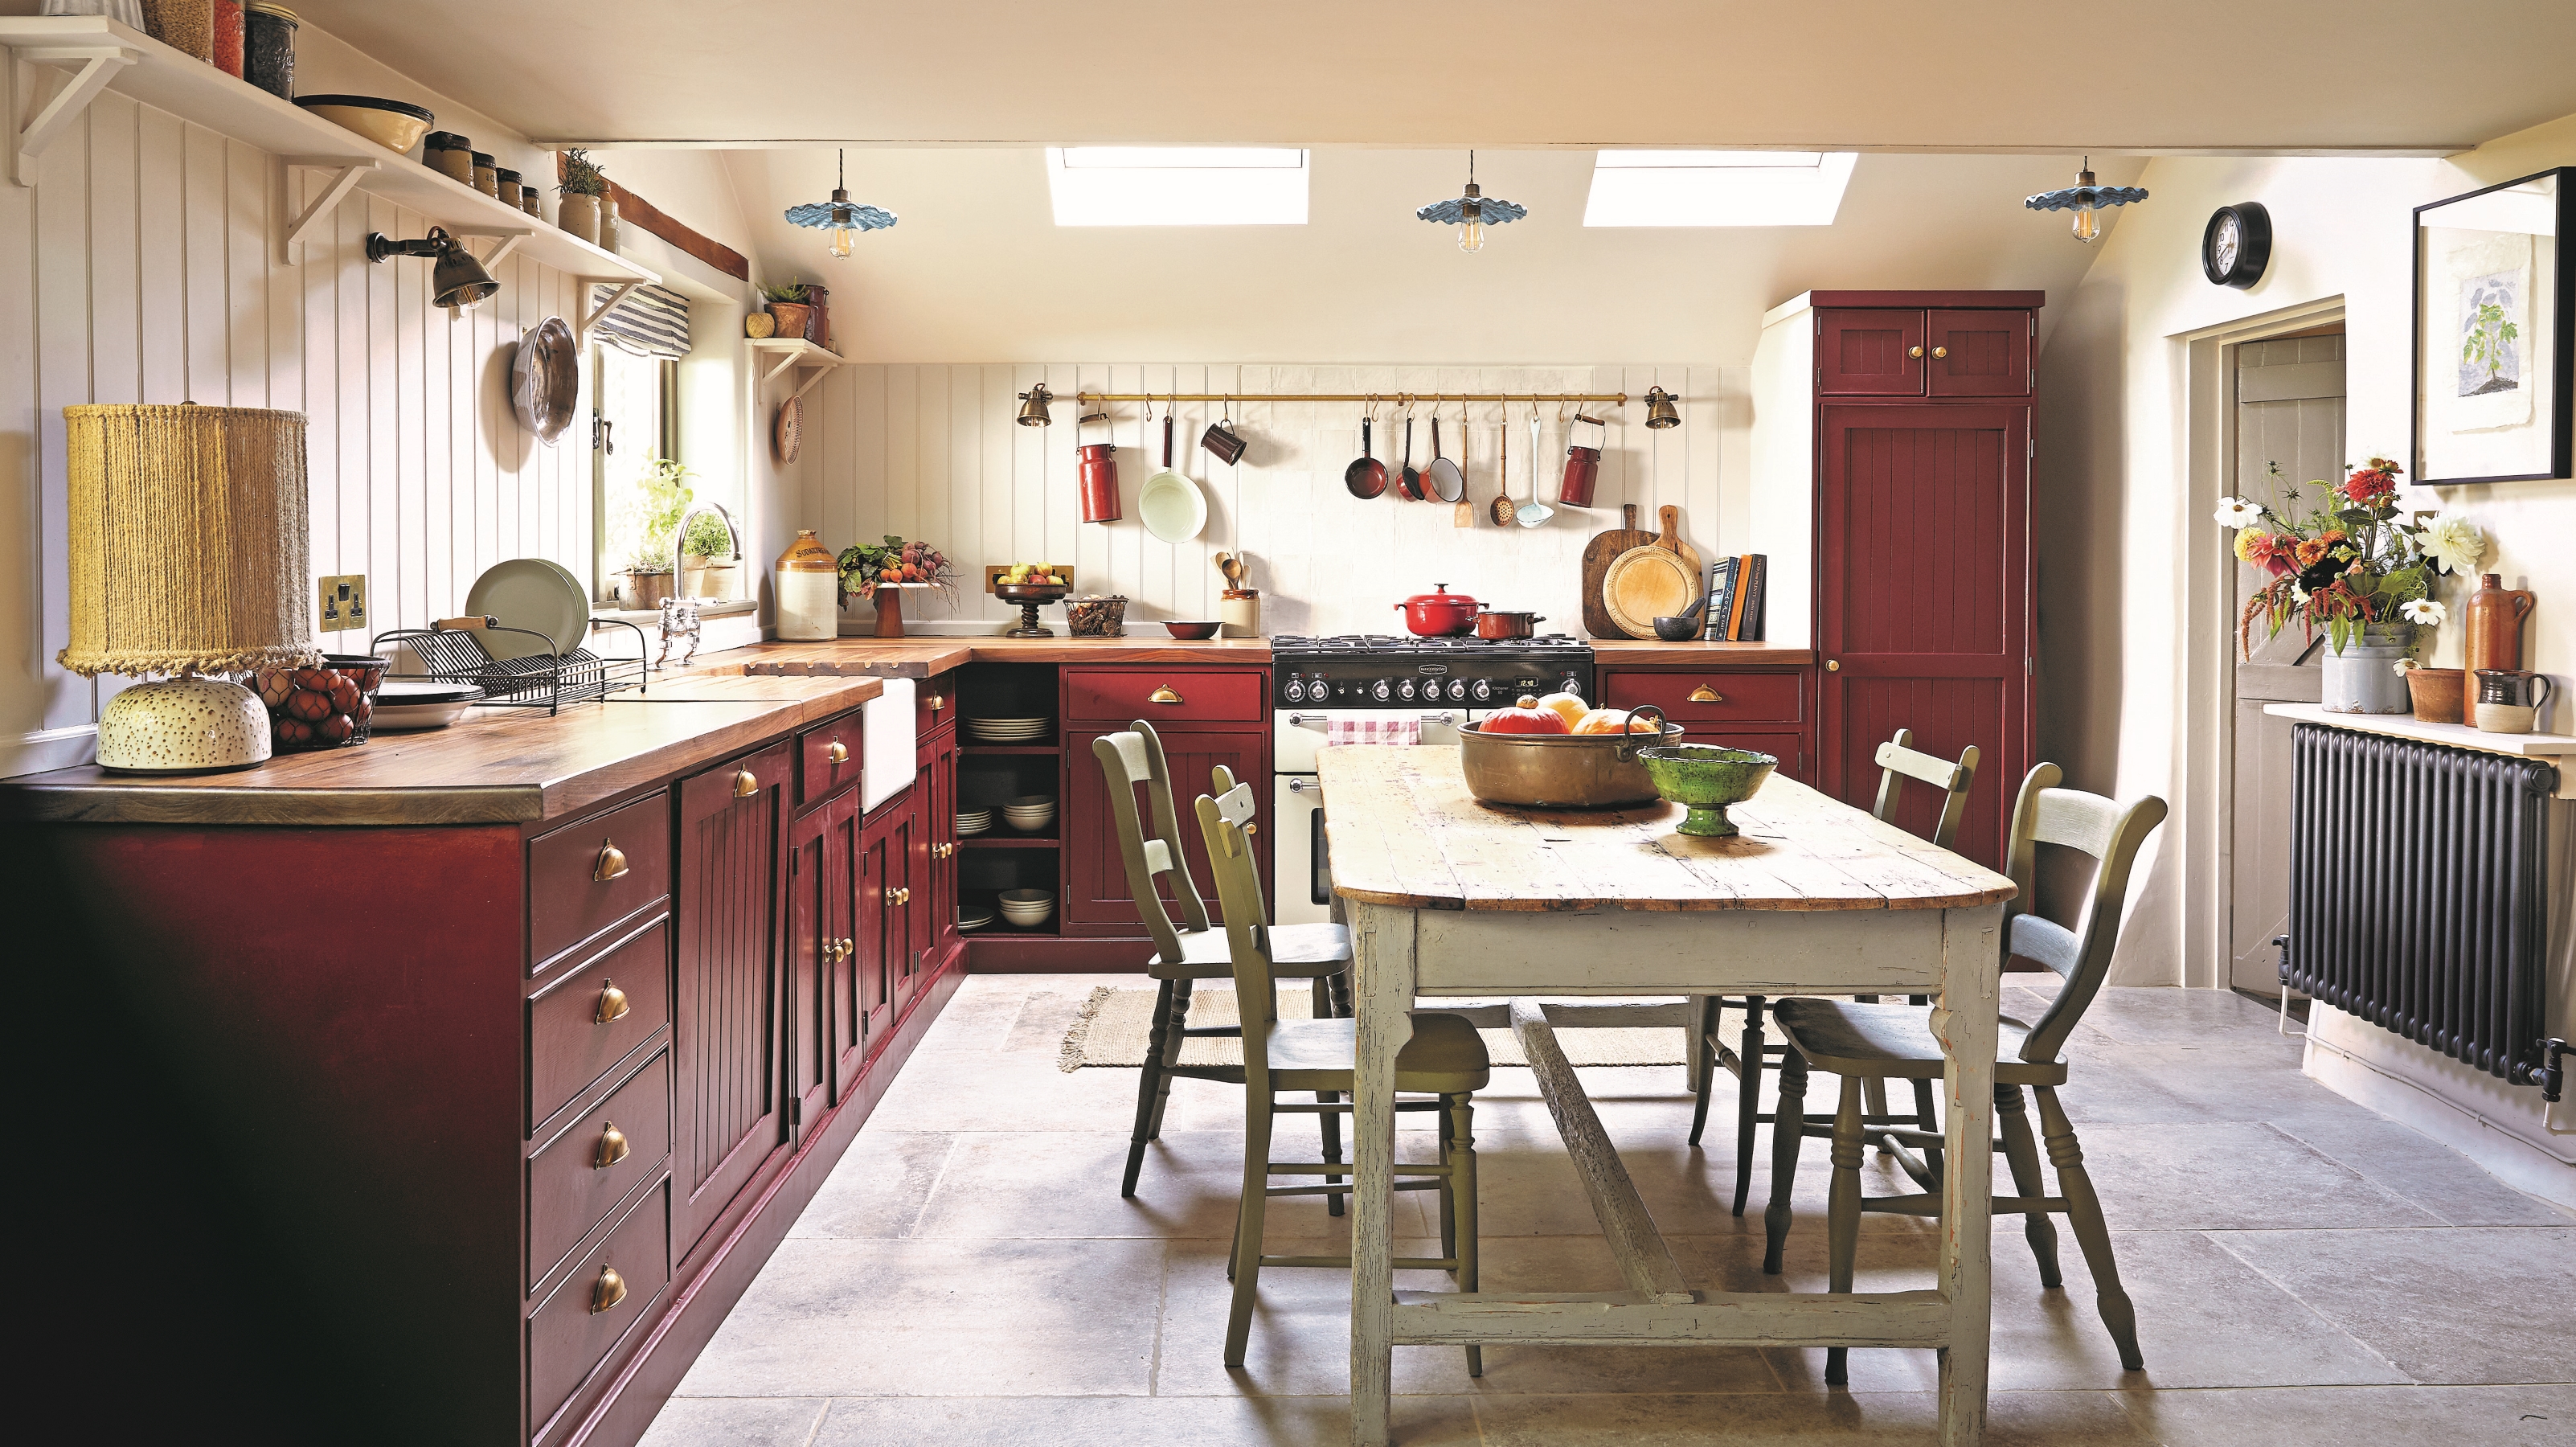 16 Inspiring Ways to Use Red in the Kitchen